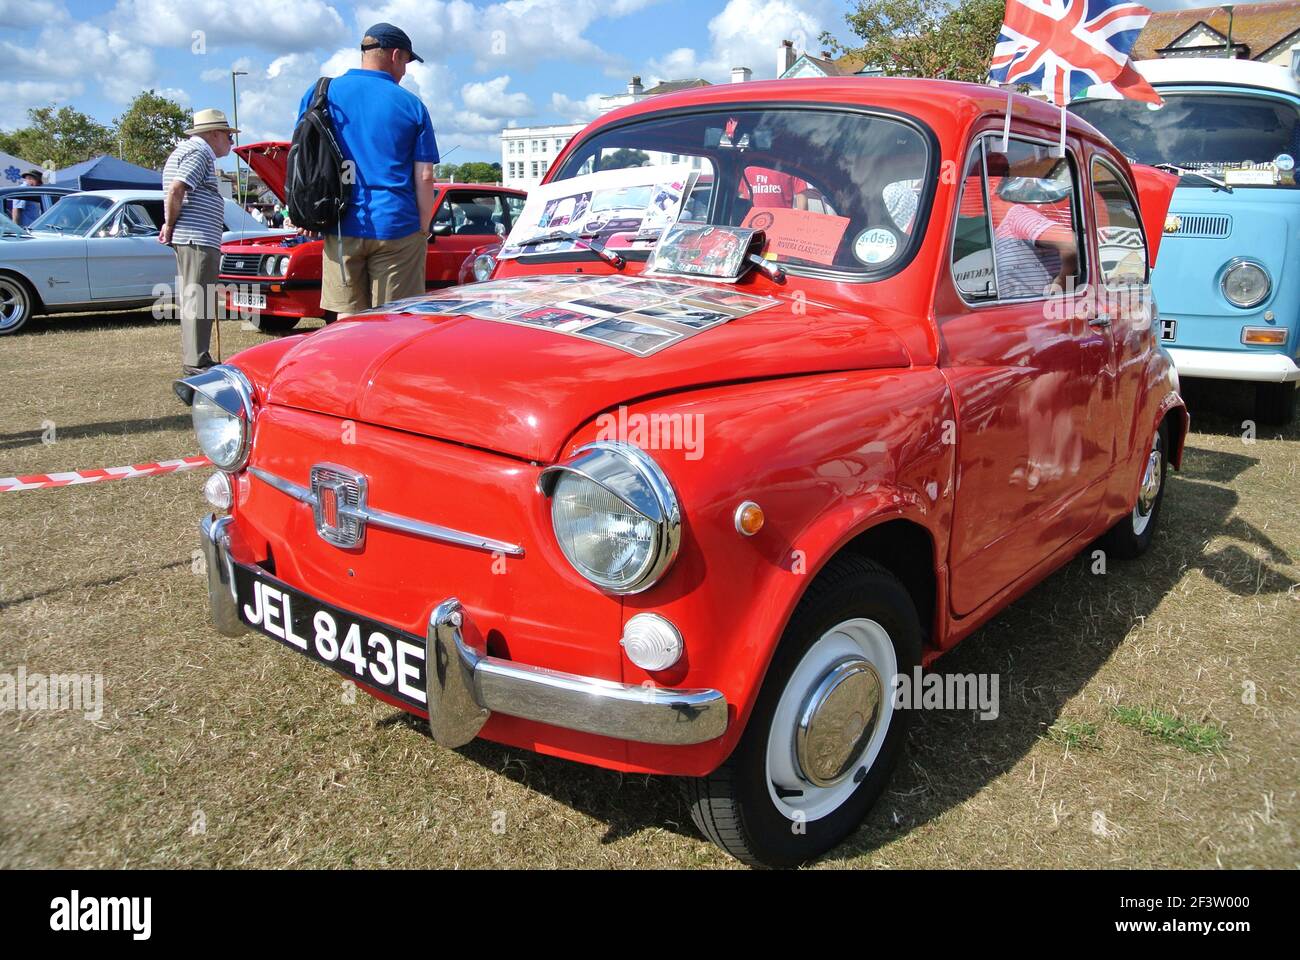 A 1967 Fiat 600 parked up on display at the English Riviera classic car show, Paignton, Devon, England, UK. Stock Photo